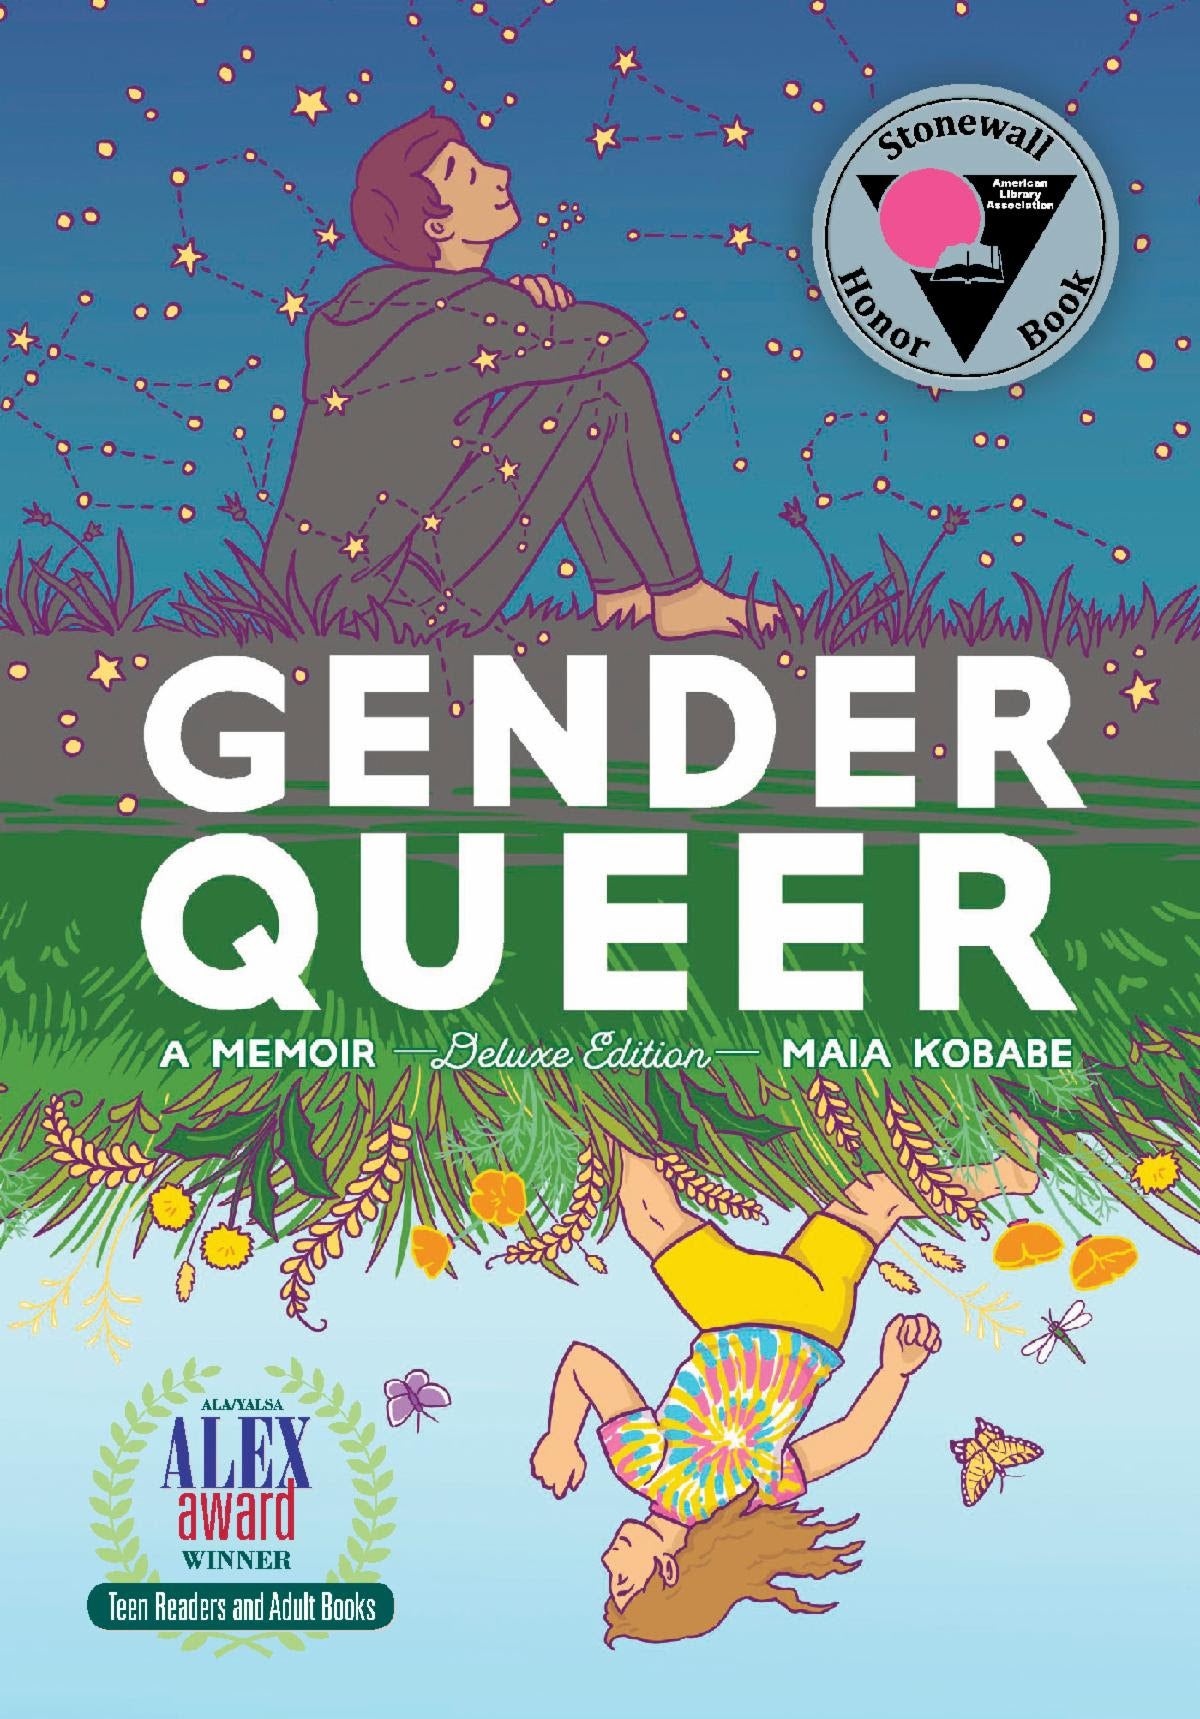 Cropped image of Gender Queer deluxe edition cover, showing seated figure on grass, smiling with closed eyes, image is overlayed by a constellation motif, on the flip side of the cover, a figure wearing at tie die shirt running in a field of flowers